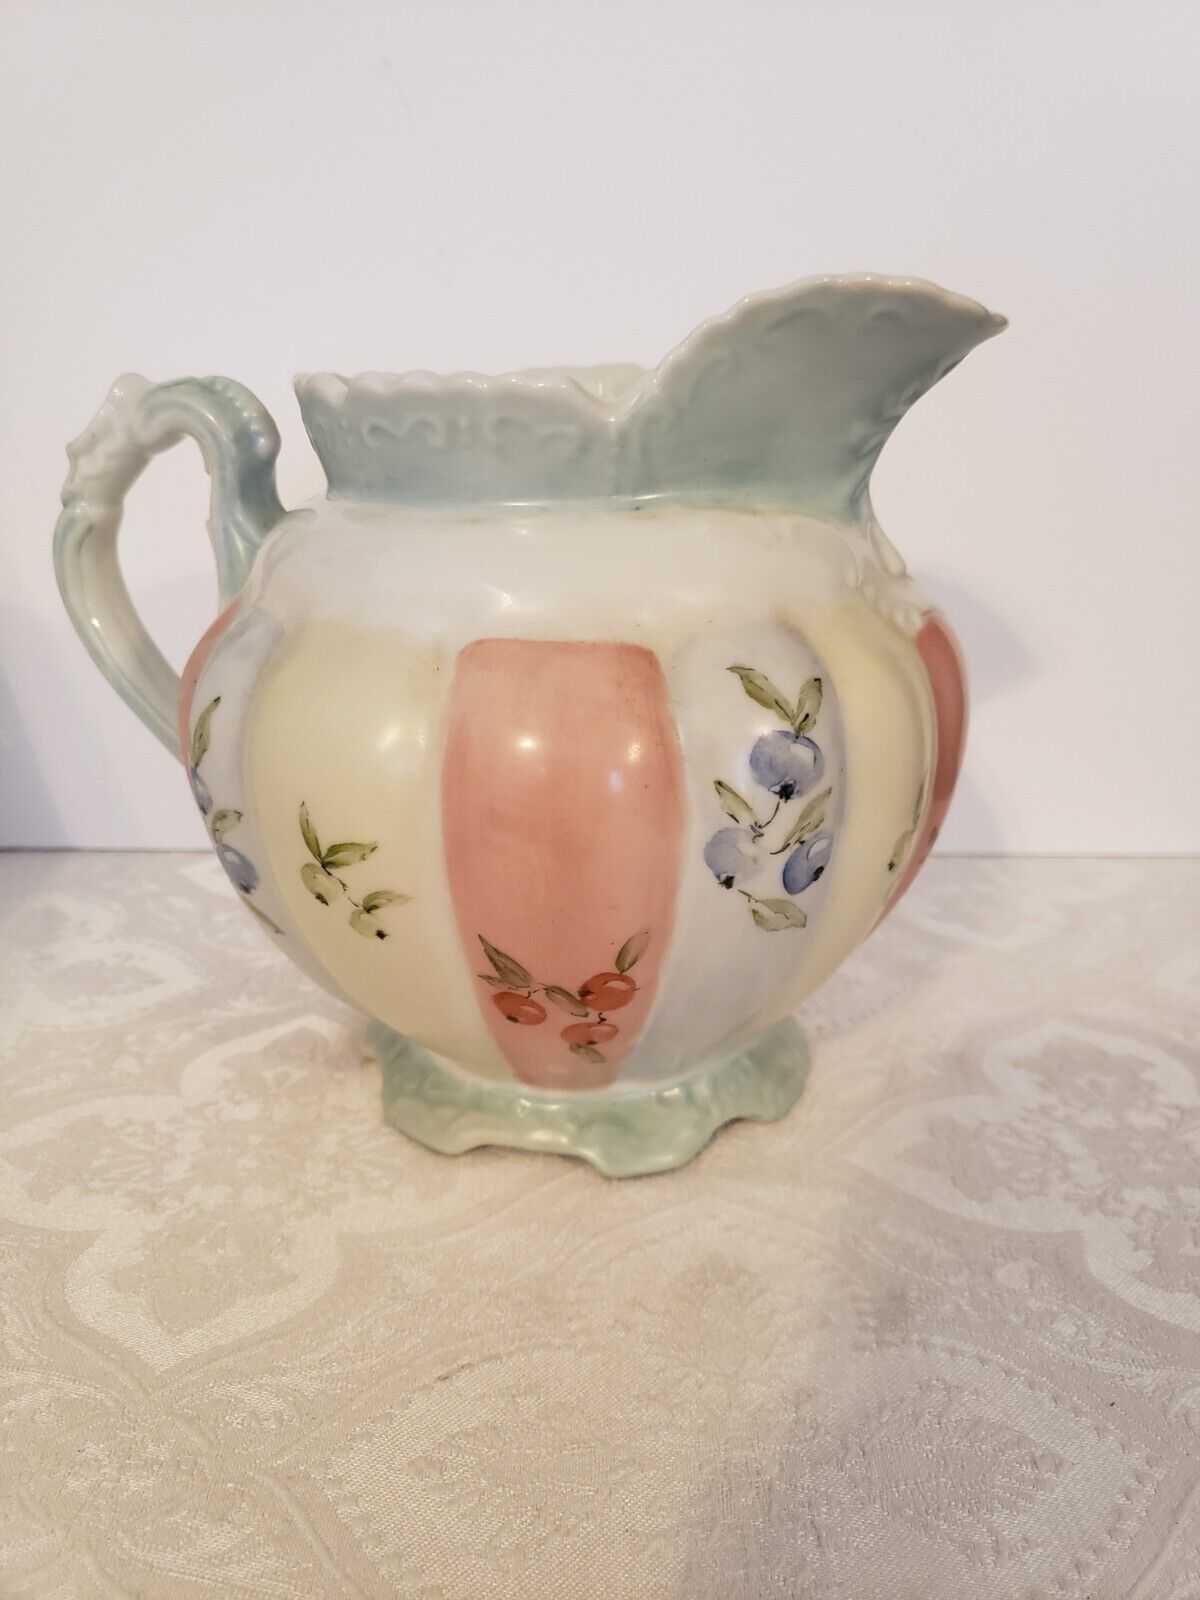 Porcelain Pitcher Handpainted Signed (Bricker) Floral Country Farmhouse Shabby